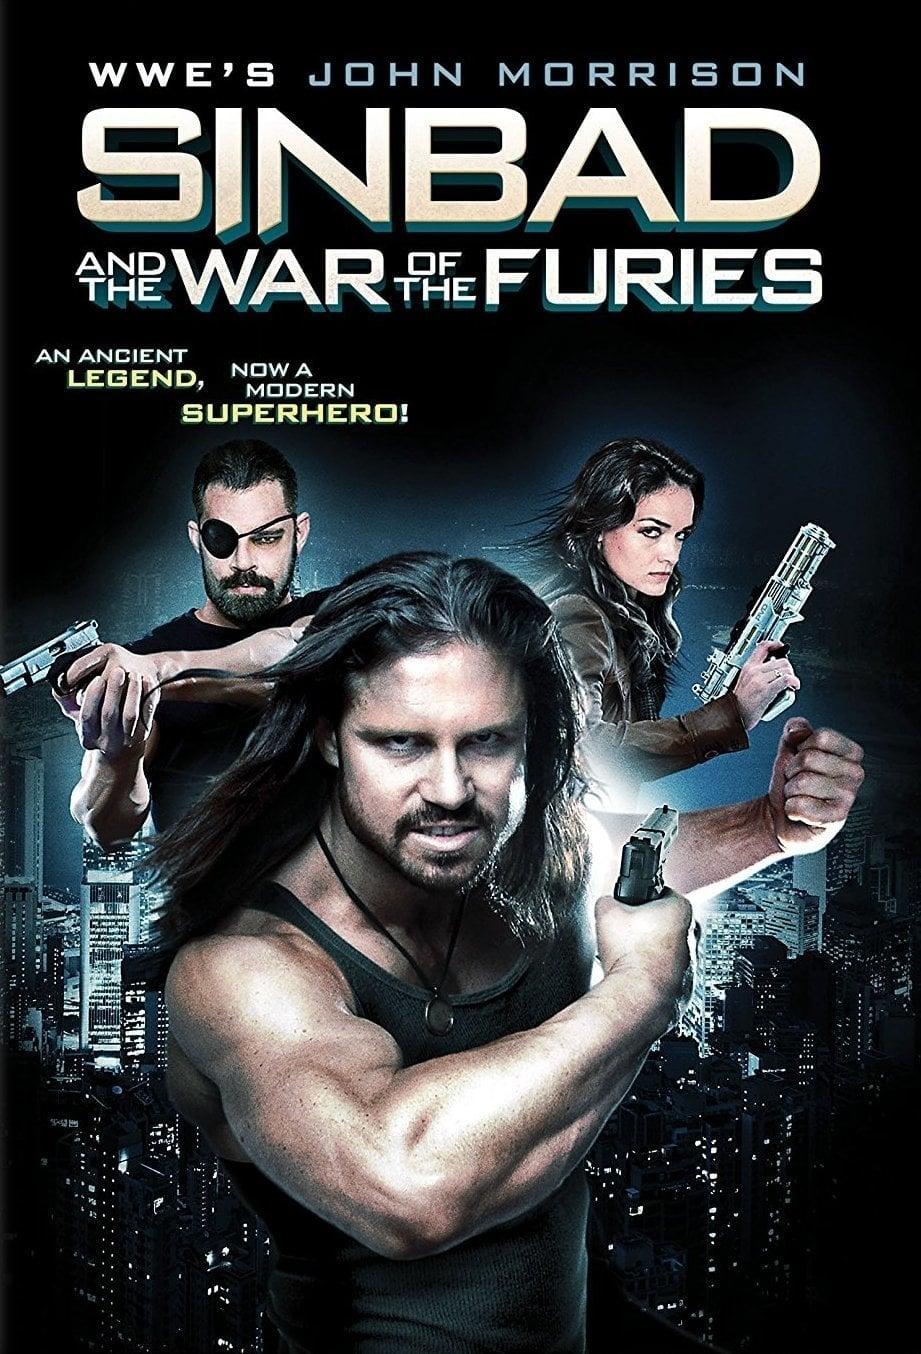 Sinbad and the War of the Furies poster